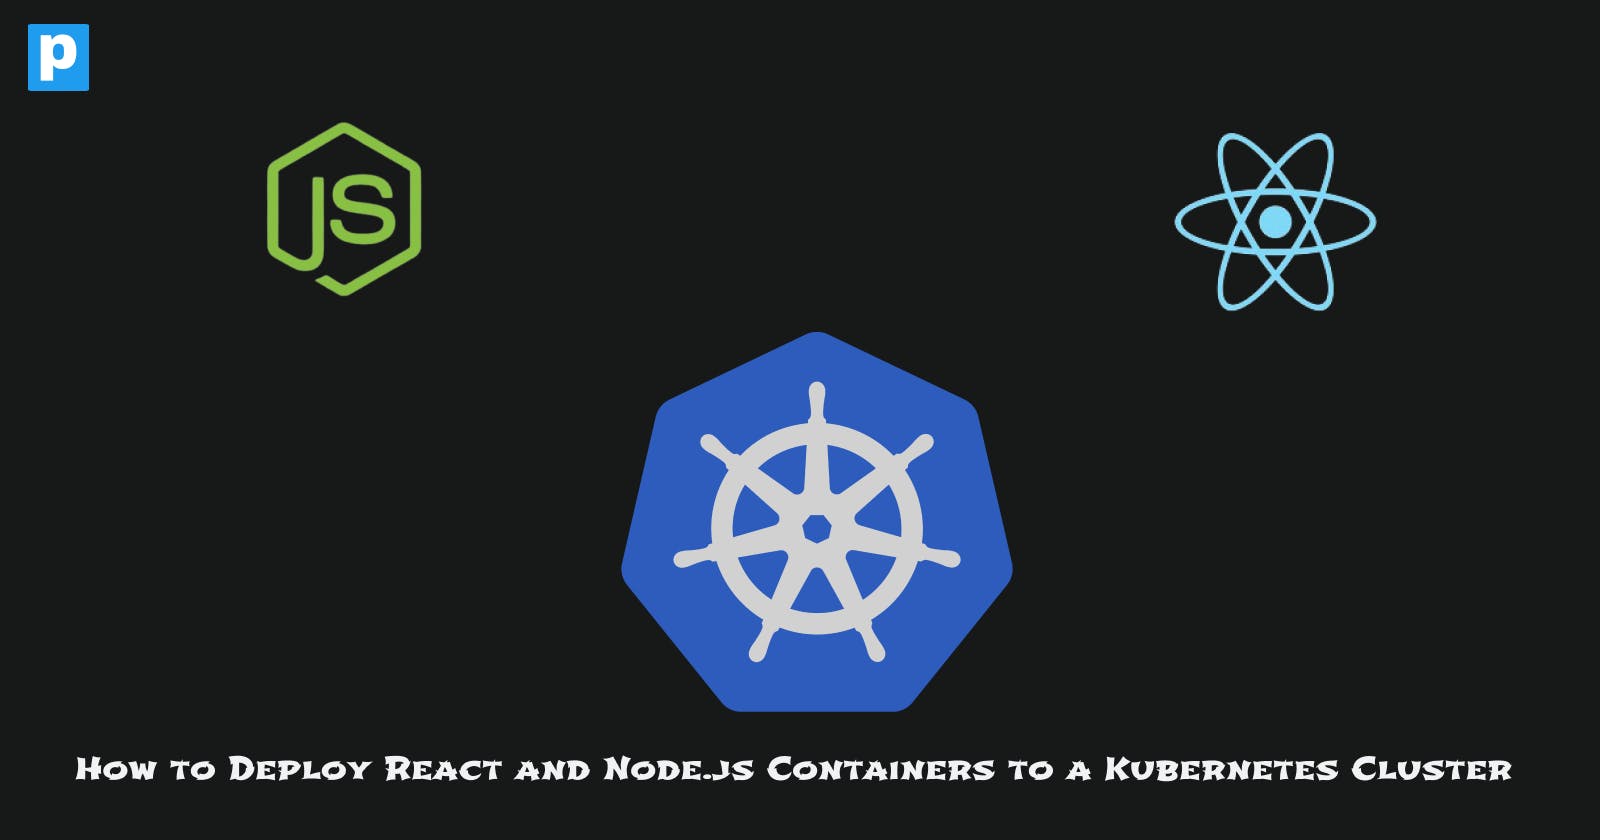 How to Deploy React and Node.js Containers to a Kubernetes Cluster